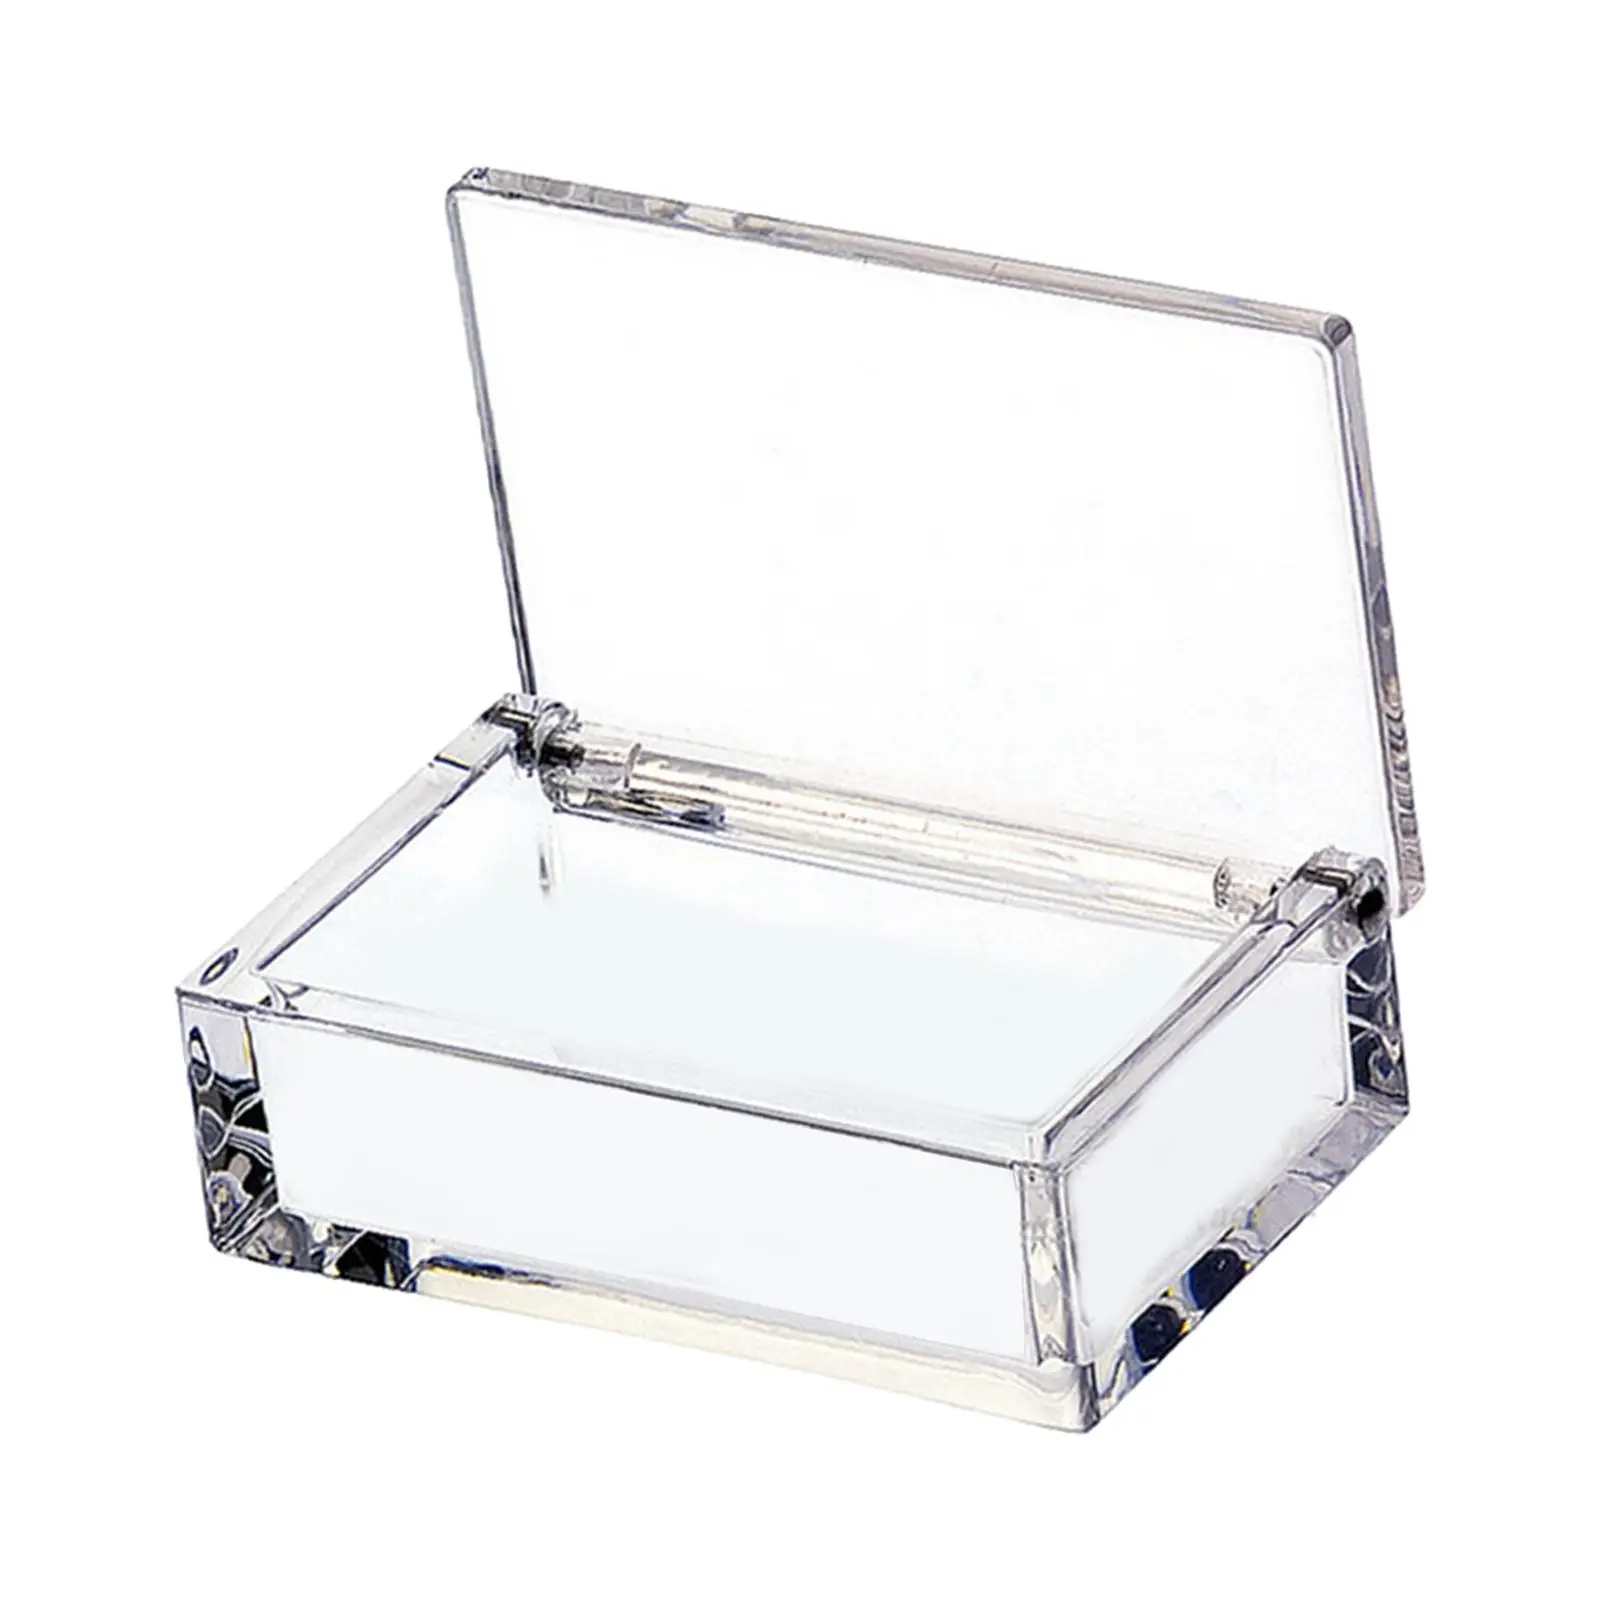 Acrylic Household Items Packing Box Waterproof Protective Cover Transparent Cigarette Case Box for Smoker Gifts